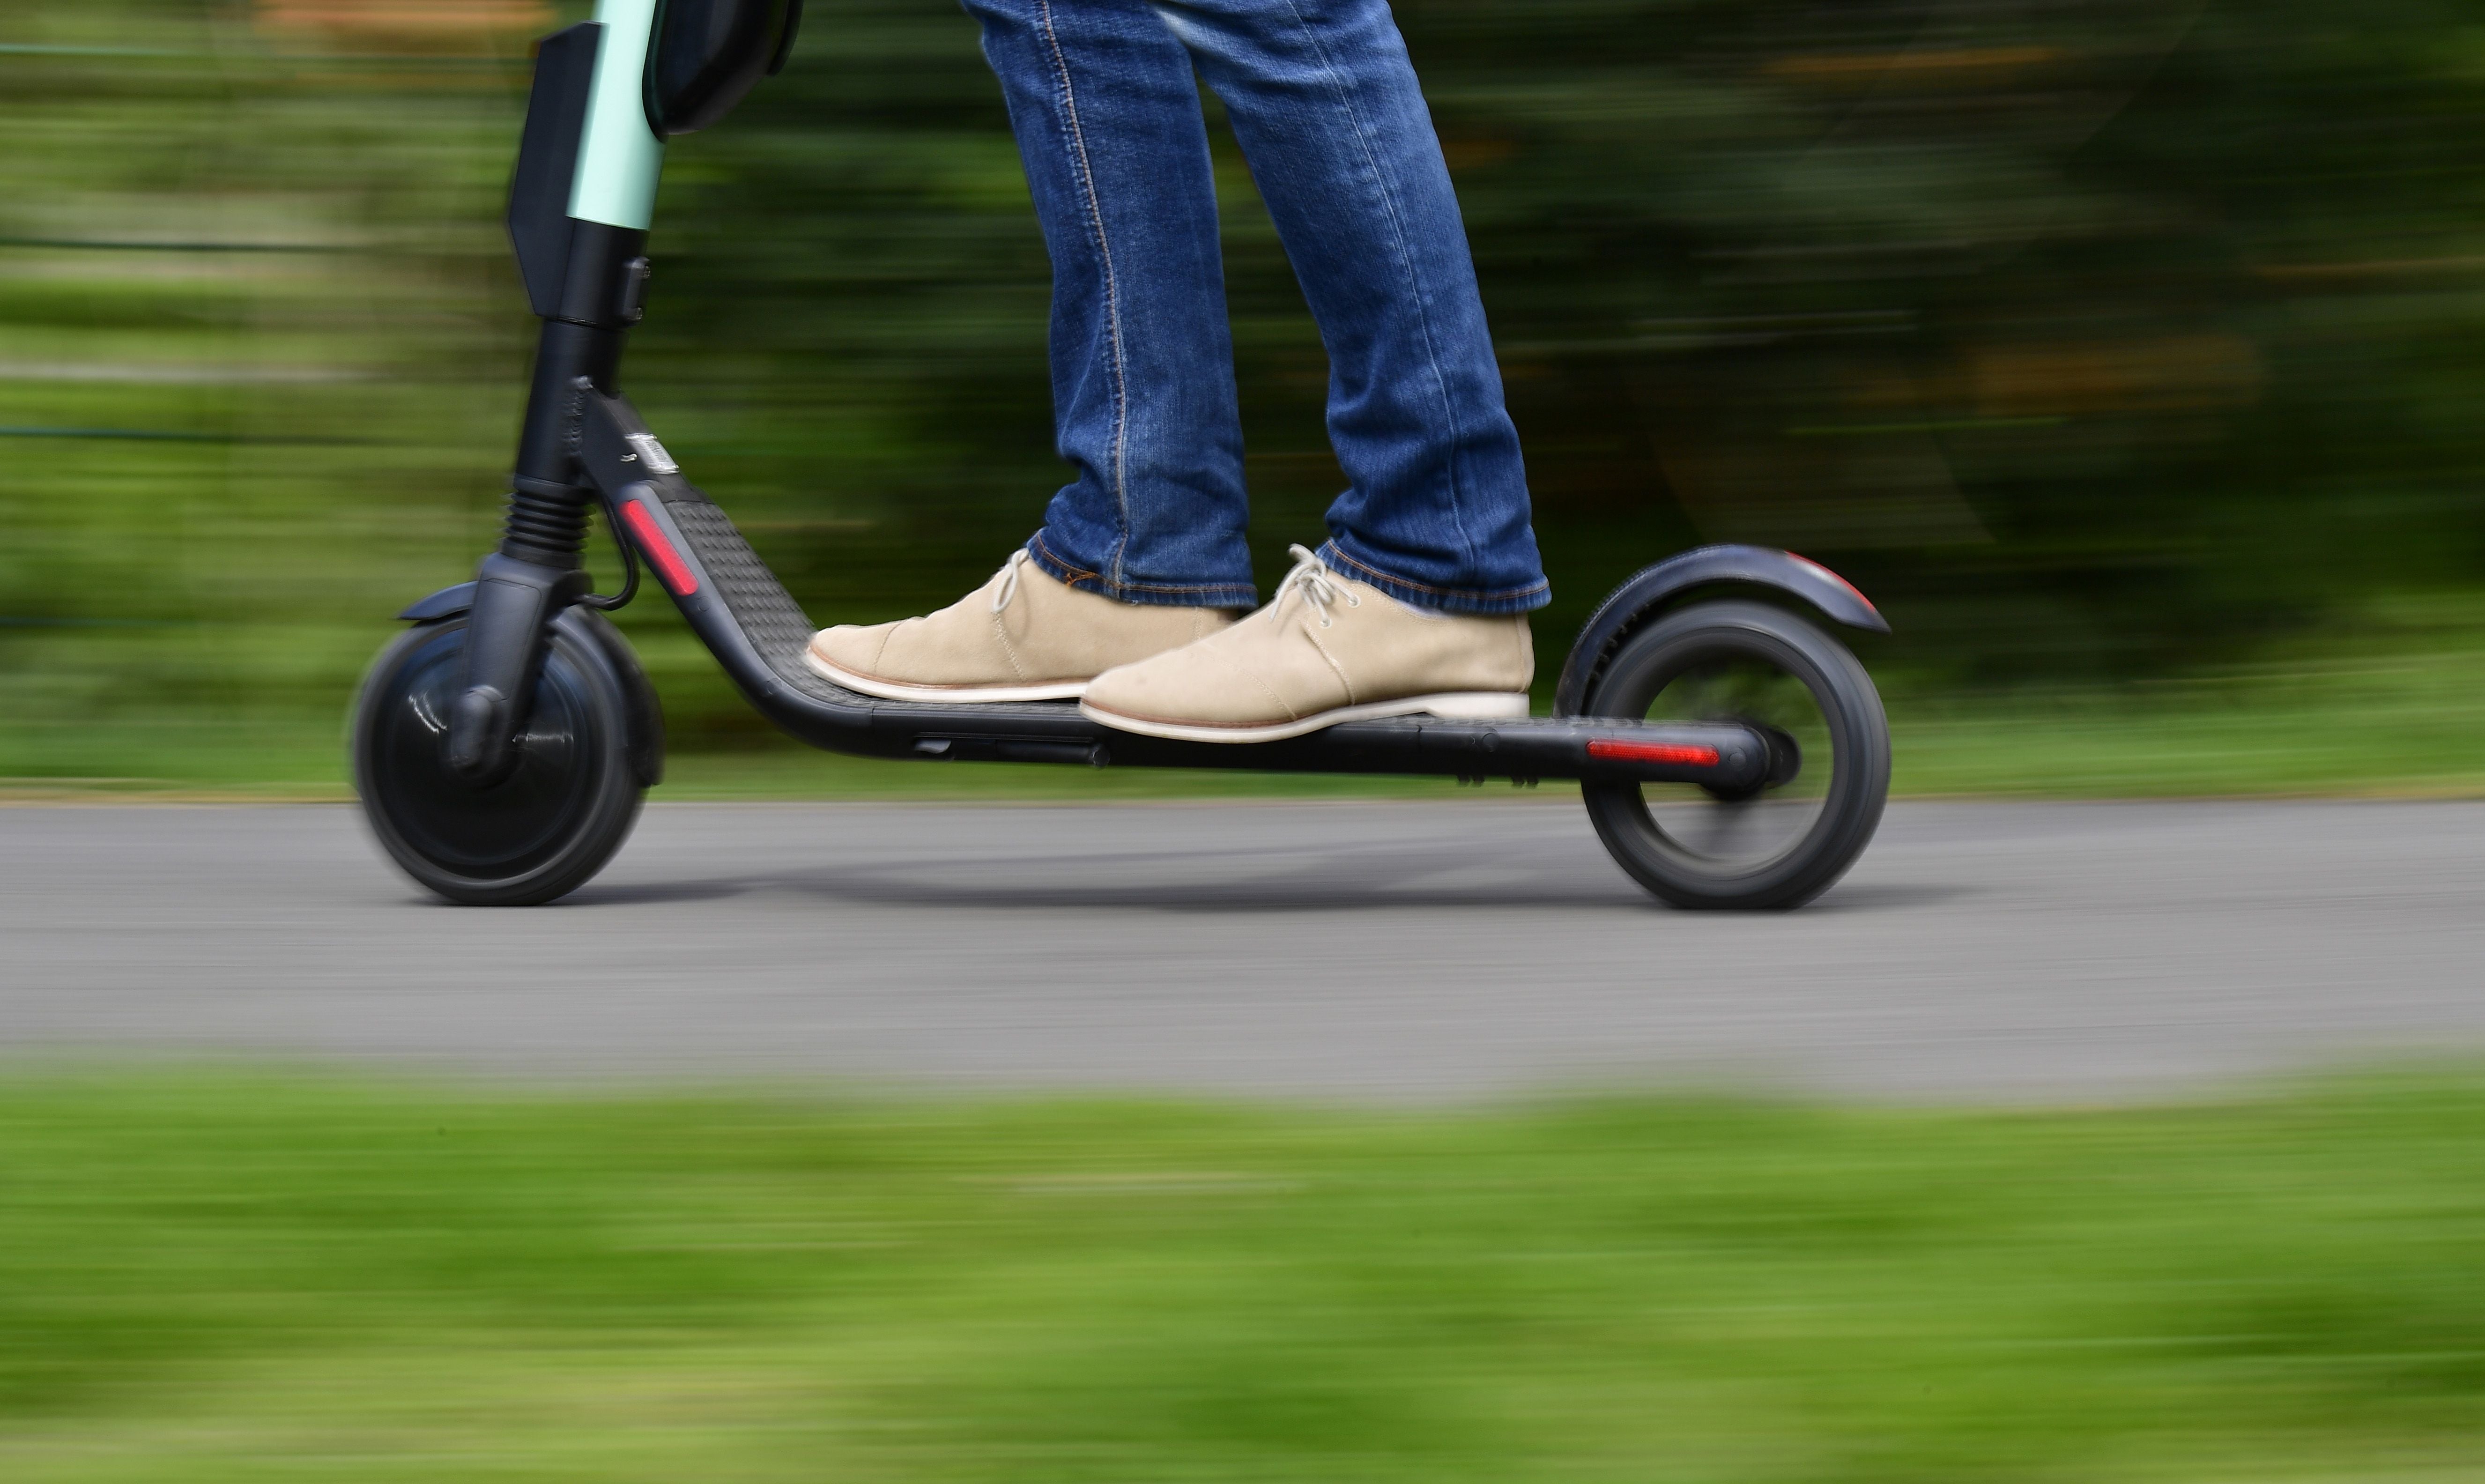 A 56-year-old man has died in Wales after falling from an electric scooter